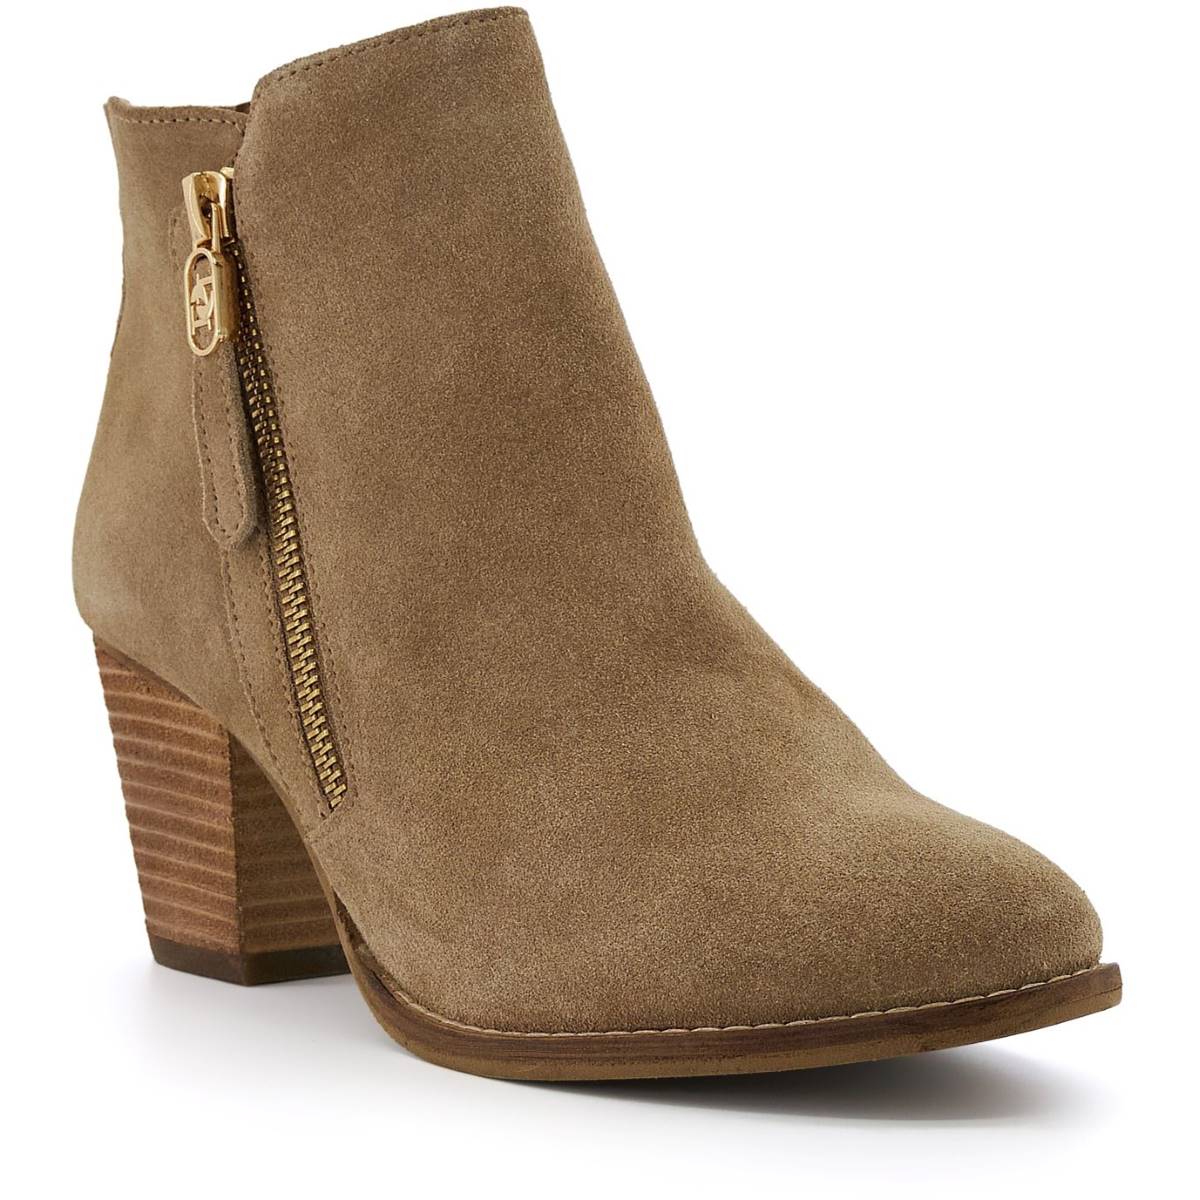 Dune London Paicey Taupe Womens ankle boots 92506690166149 in a Plain Leather in Size 7